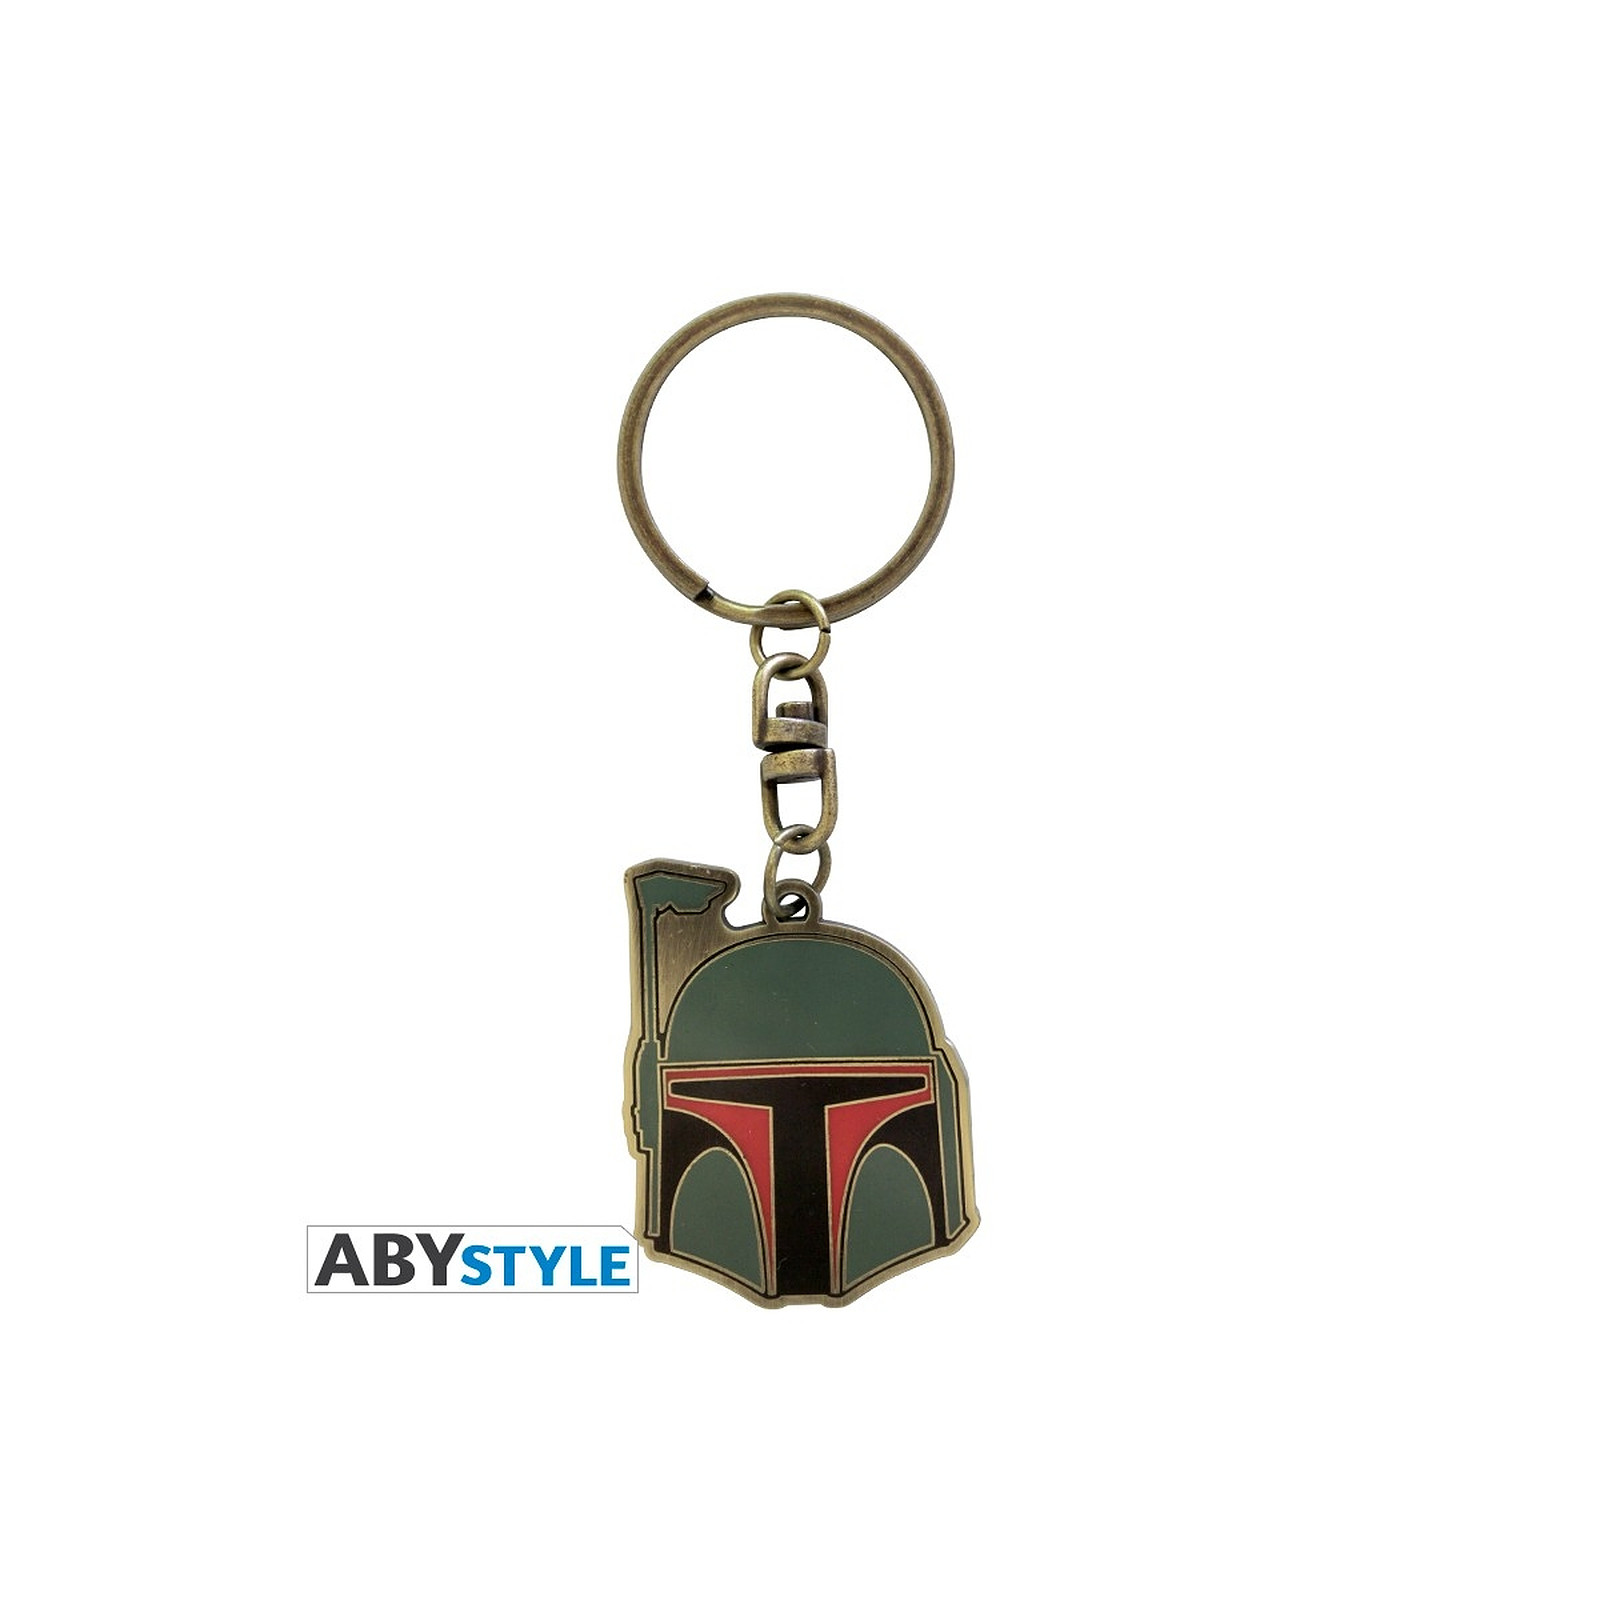 STAR WARS - Porte-cles Boba Fett - Porte-cles Abystyle